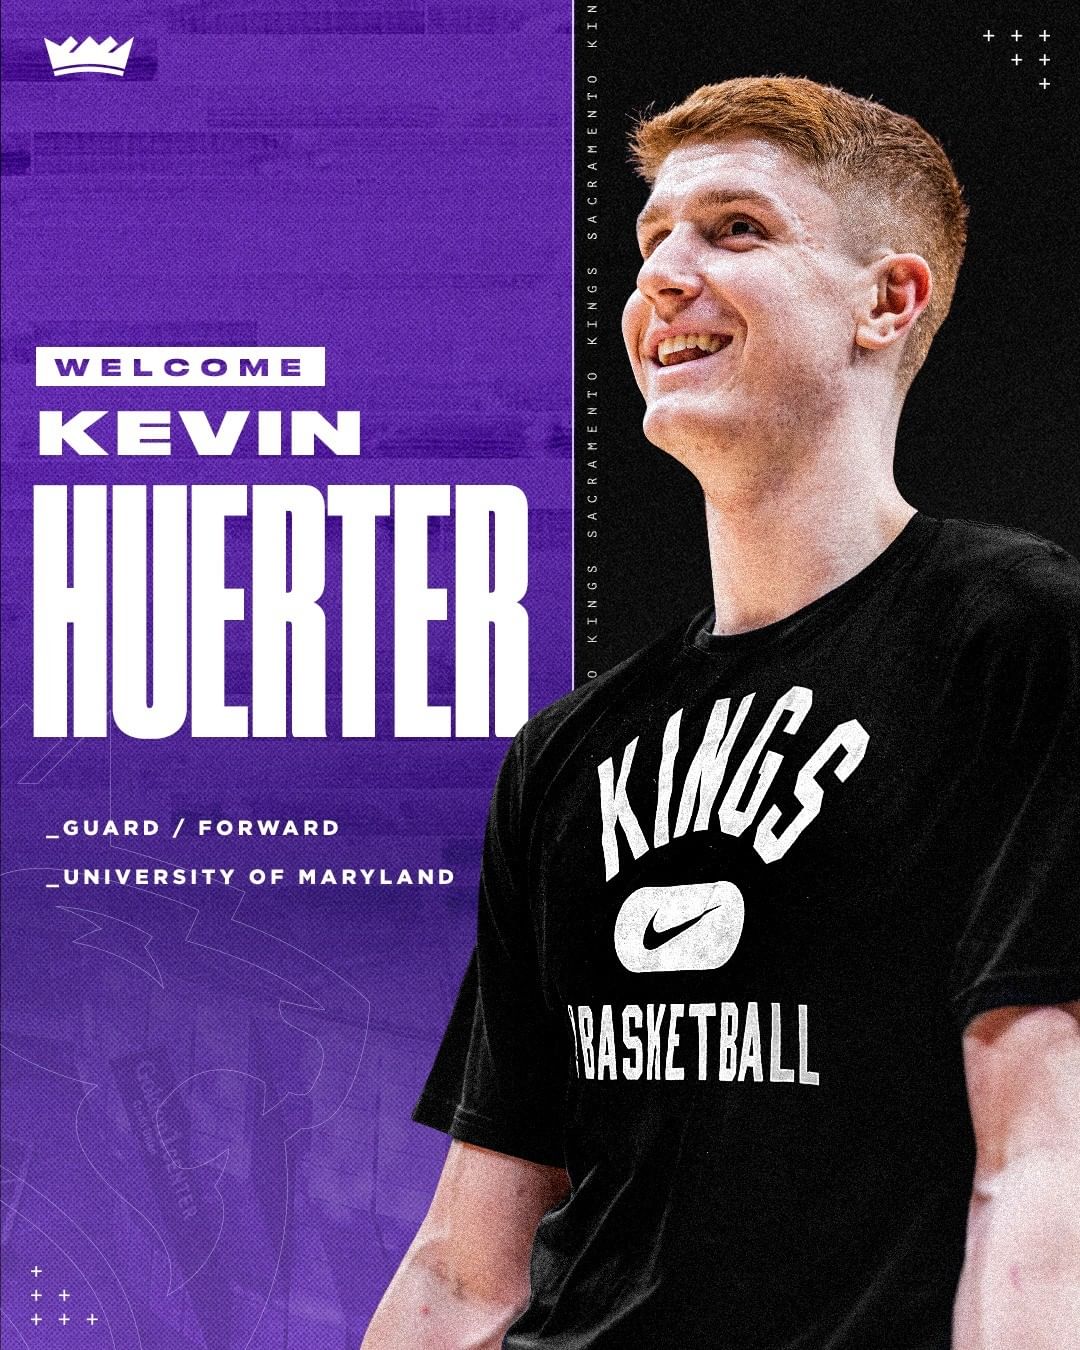 IT'S OFFICIAL: Welcome to Sactown, @kevin_huerter!...